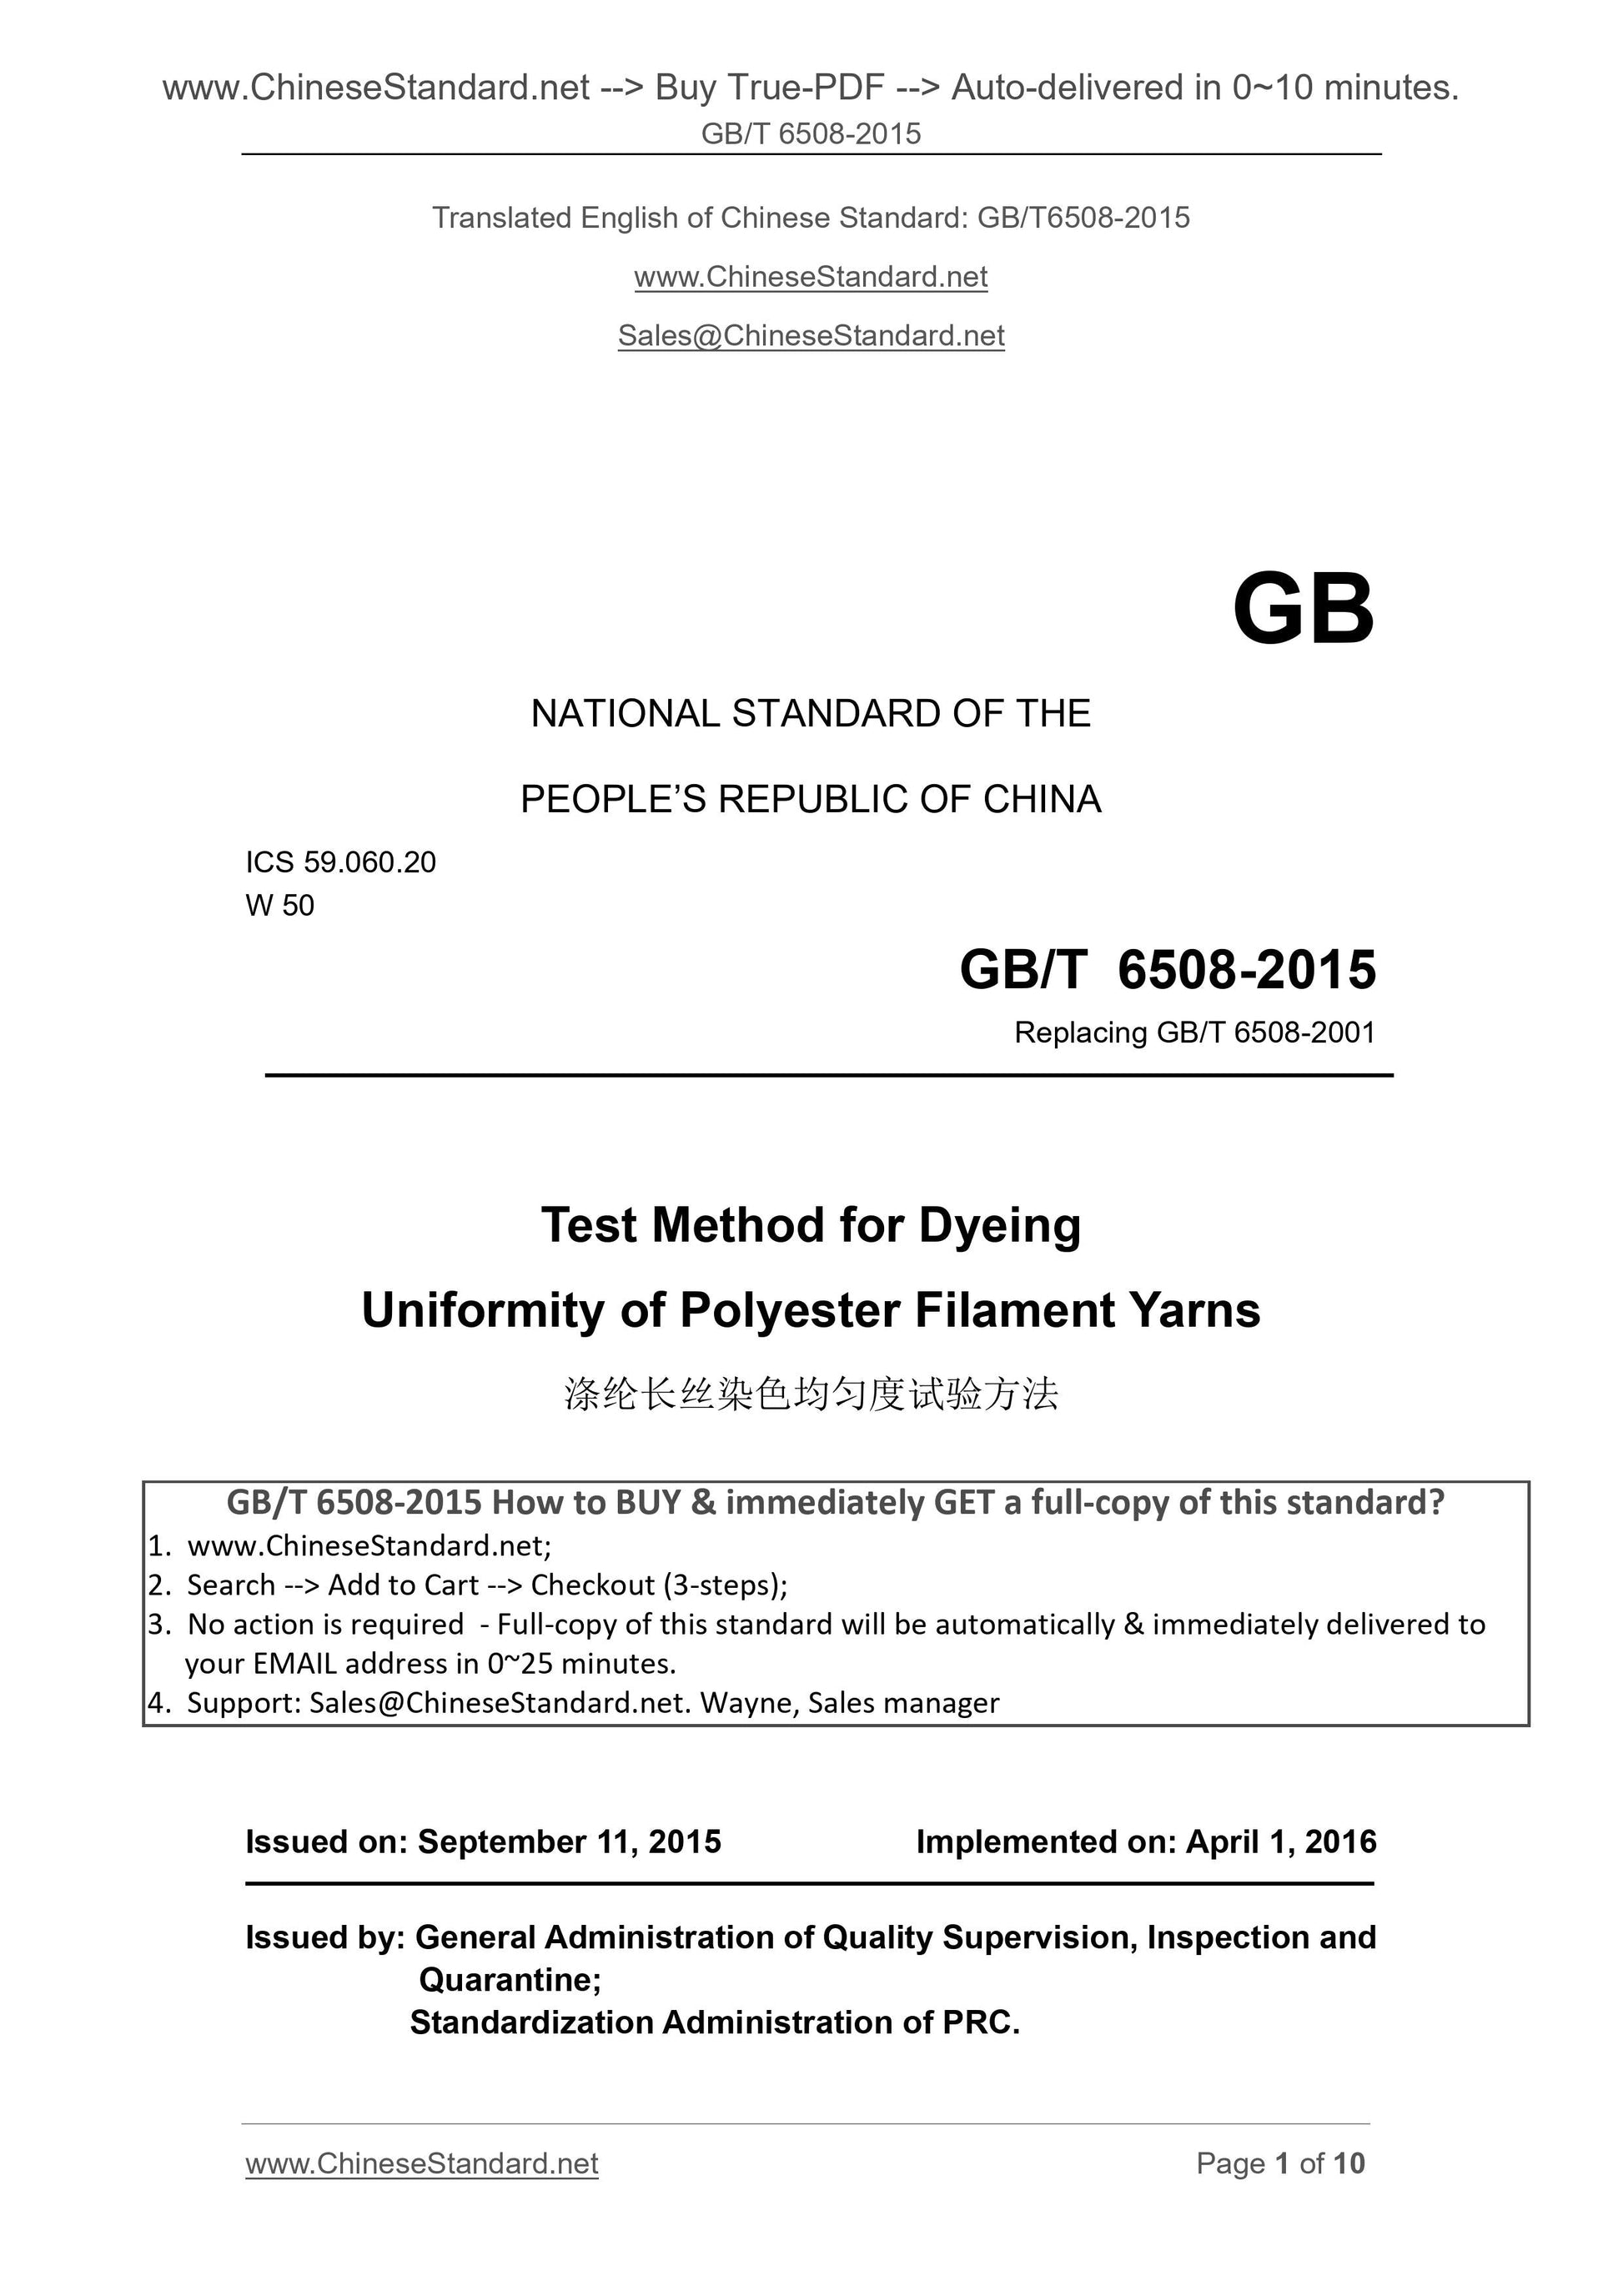 GB/T 6508-2015 Page 1